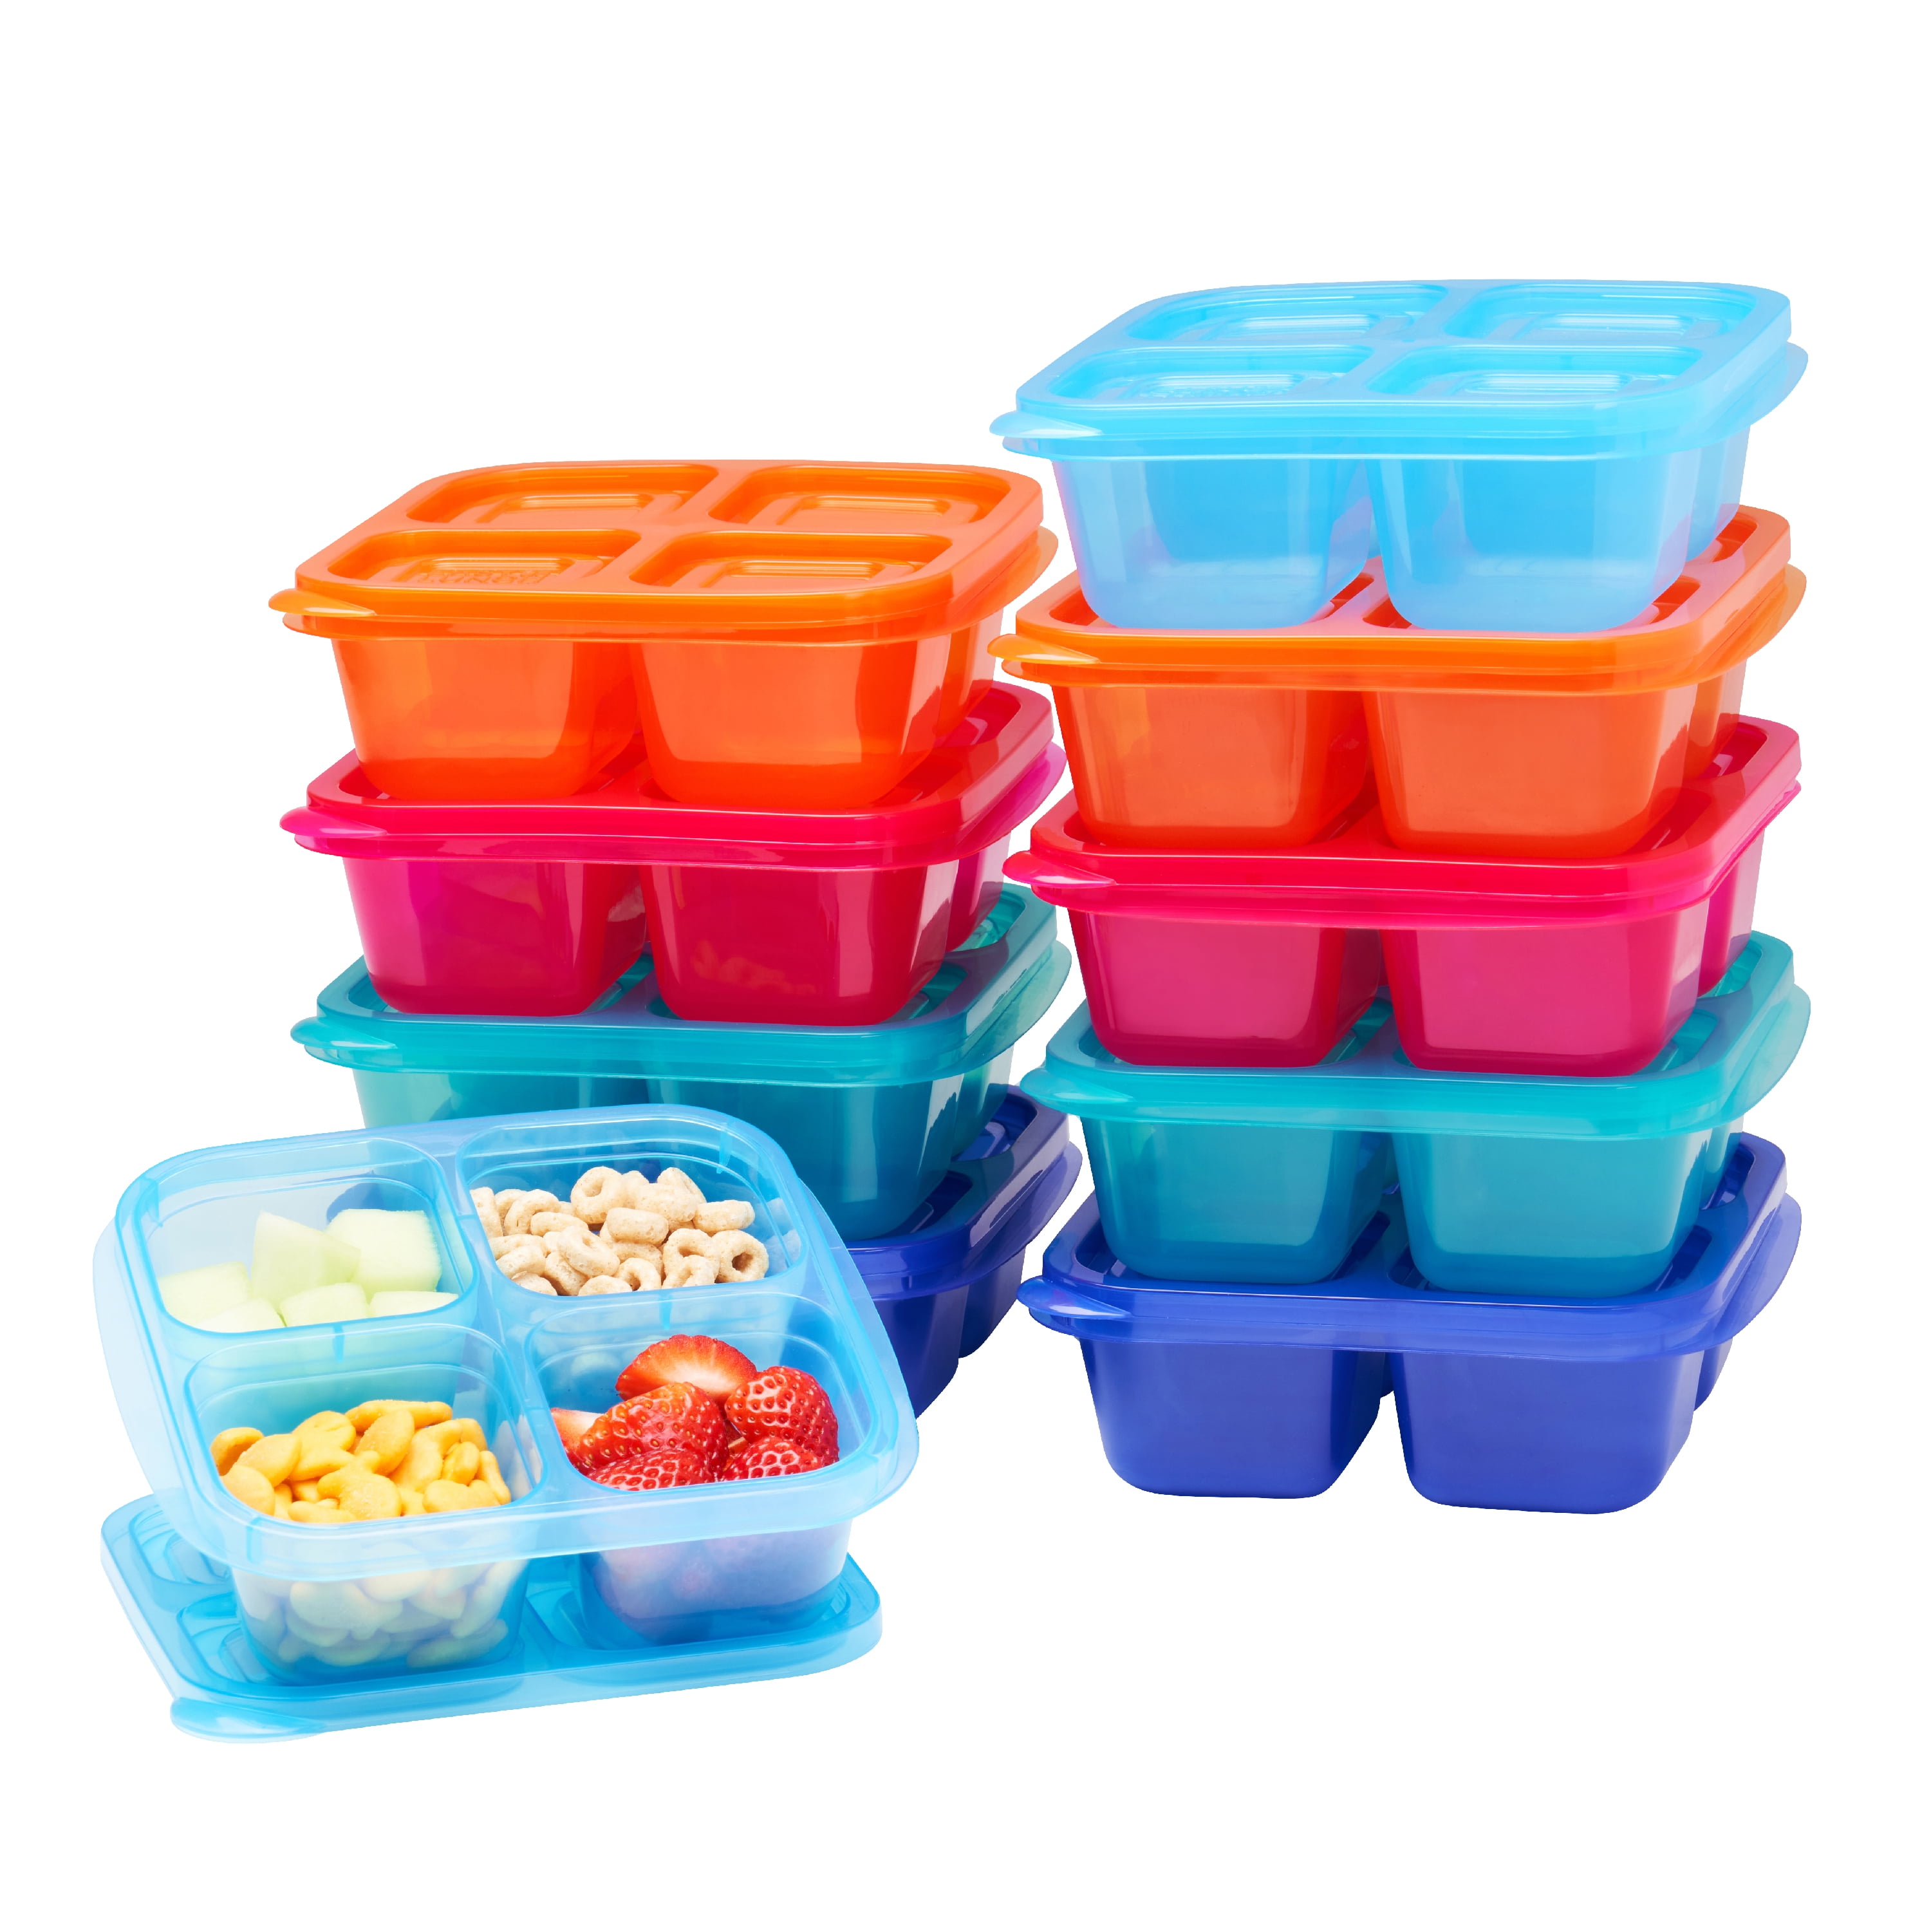  DESLON 6 Pack Snack Containers for Adults Kids, 4 Compartment  Bento Snack Box, Reusable Meal Prep Lunch Containers with Compartment, Divided  Small Snack Containers Bento Box for Travel Work: Home 